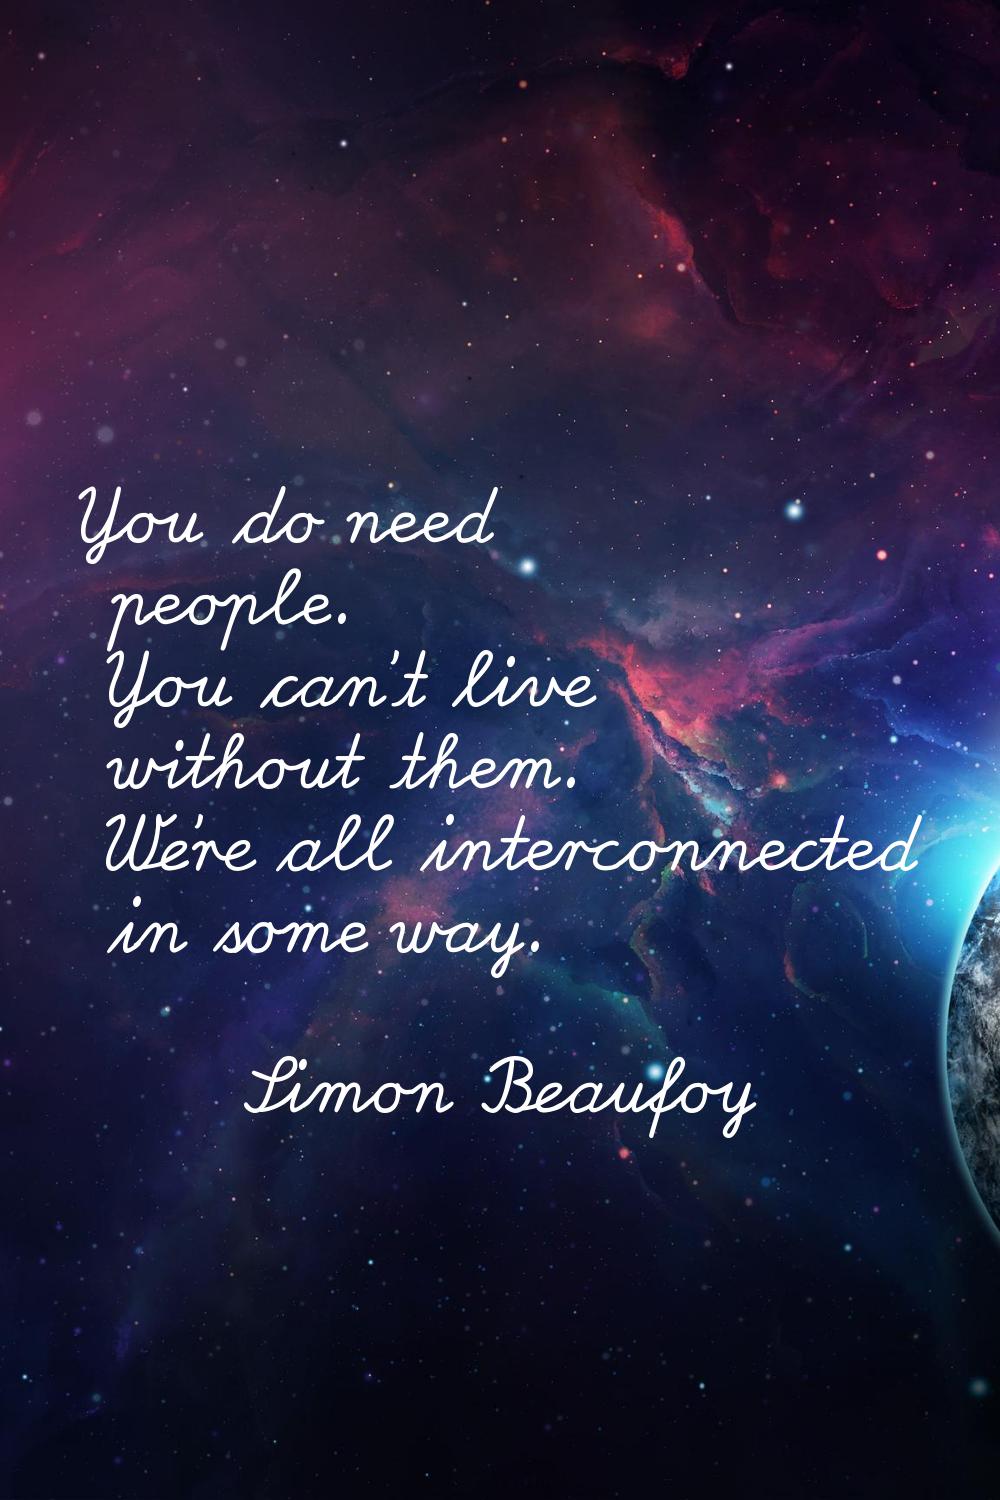 You do need people. You can't live without them. We're all interconnected in some way.